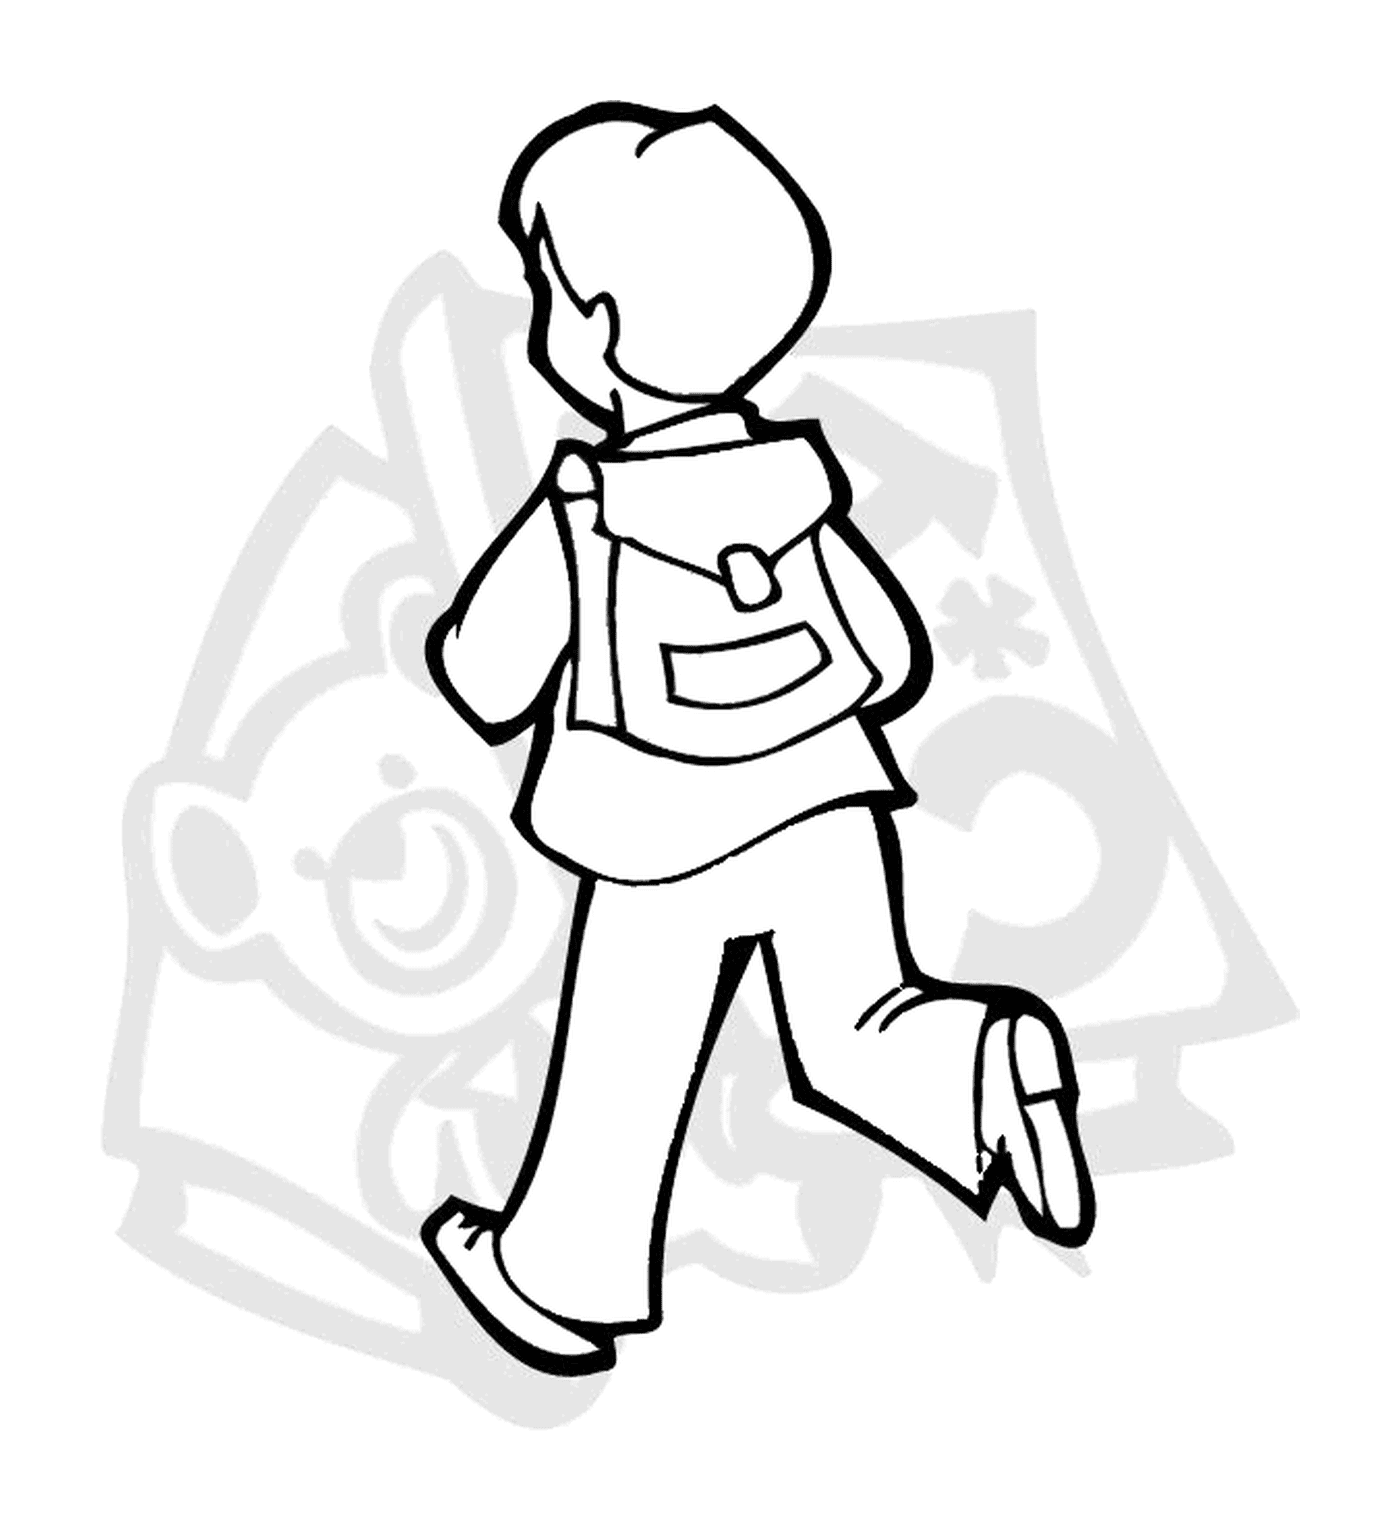  Boy with a backpack 